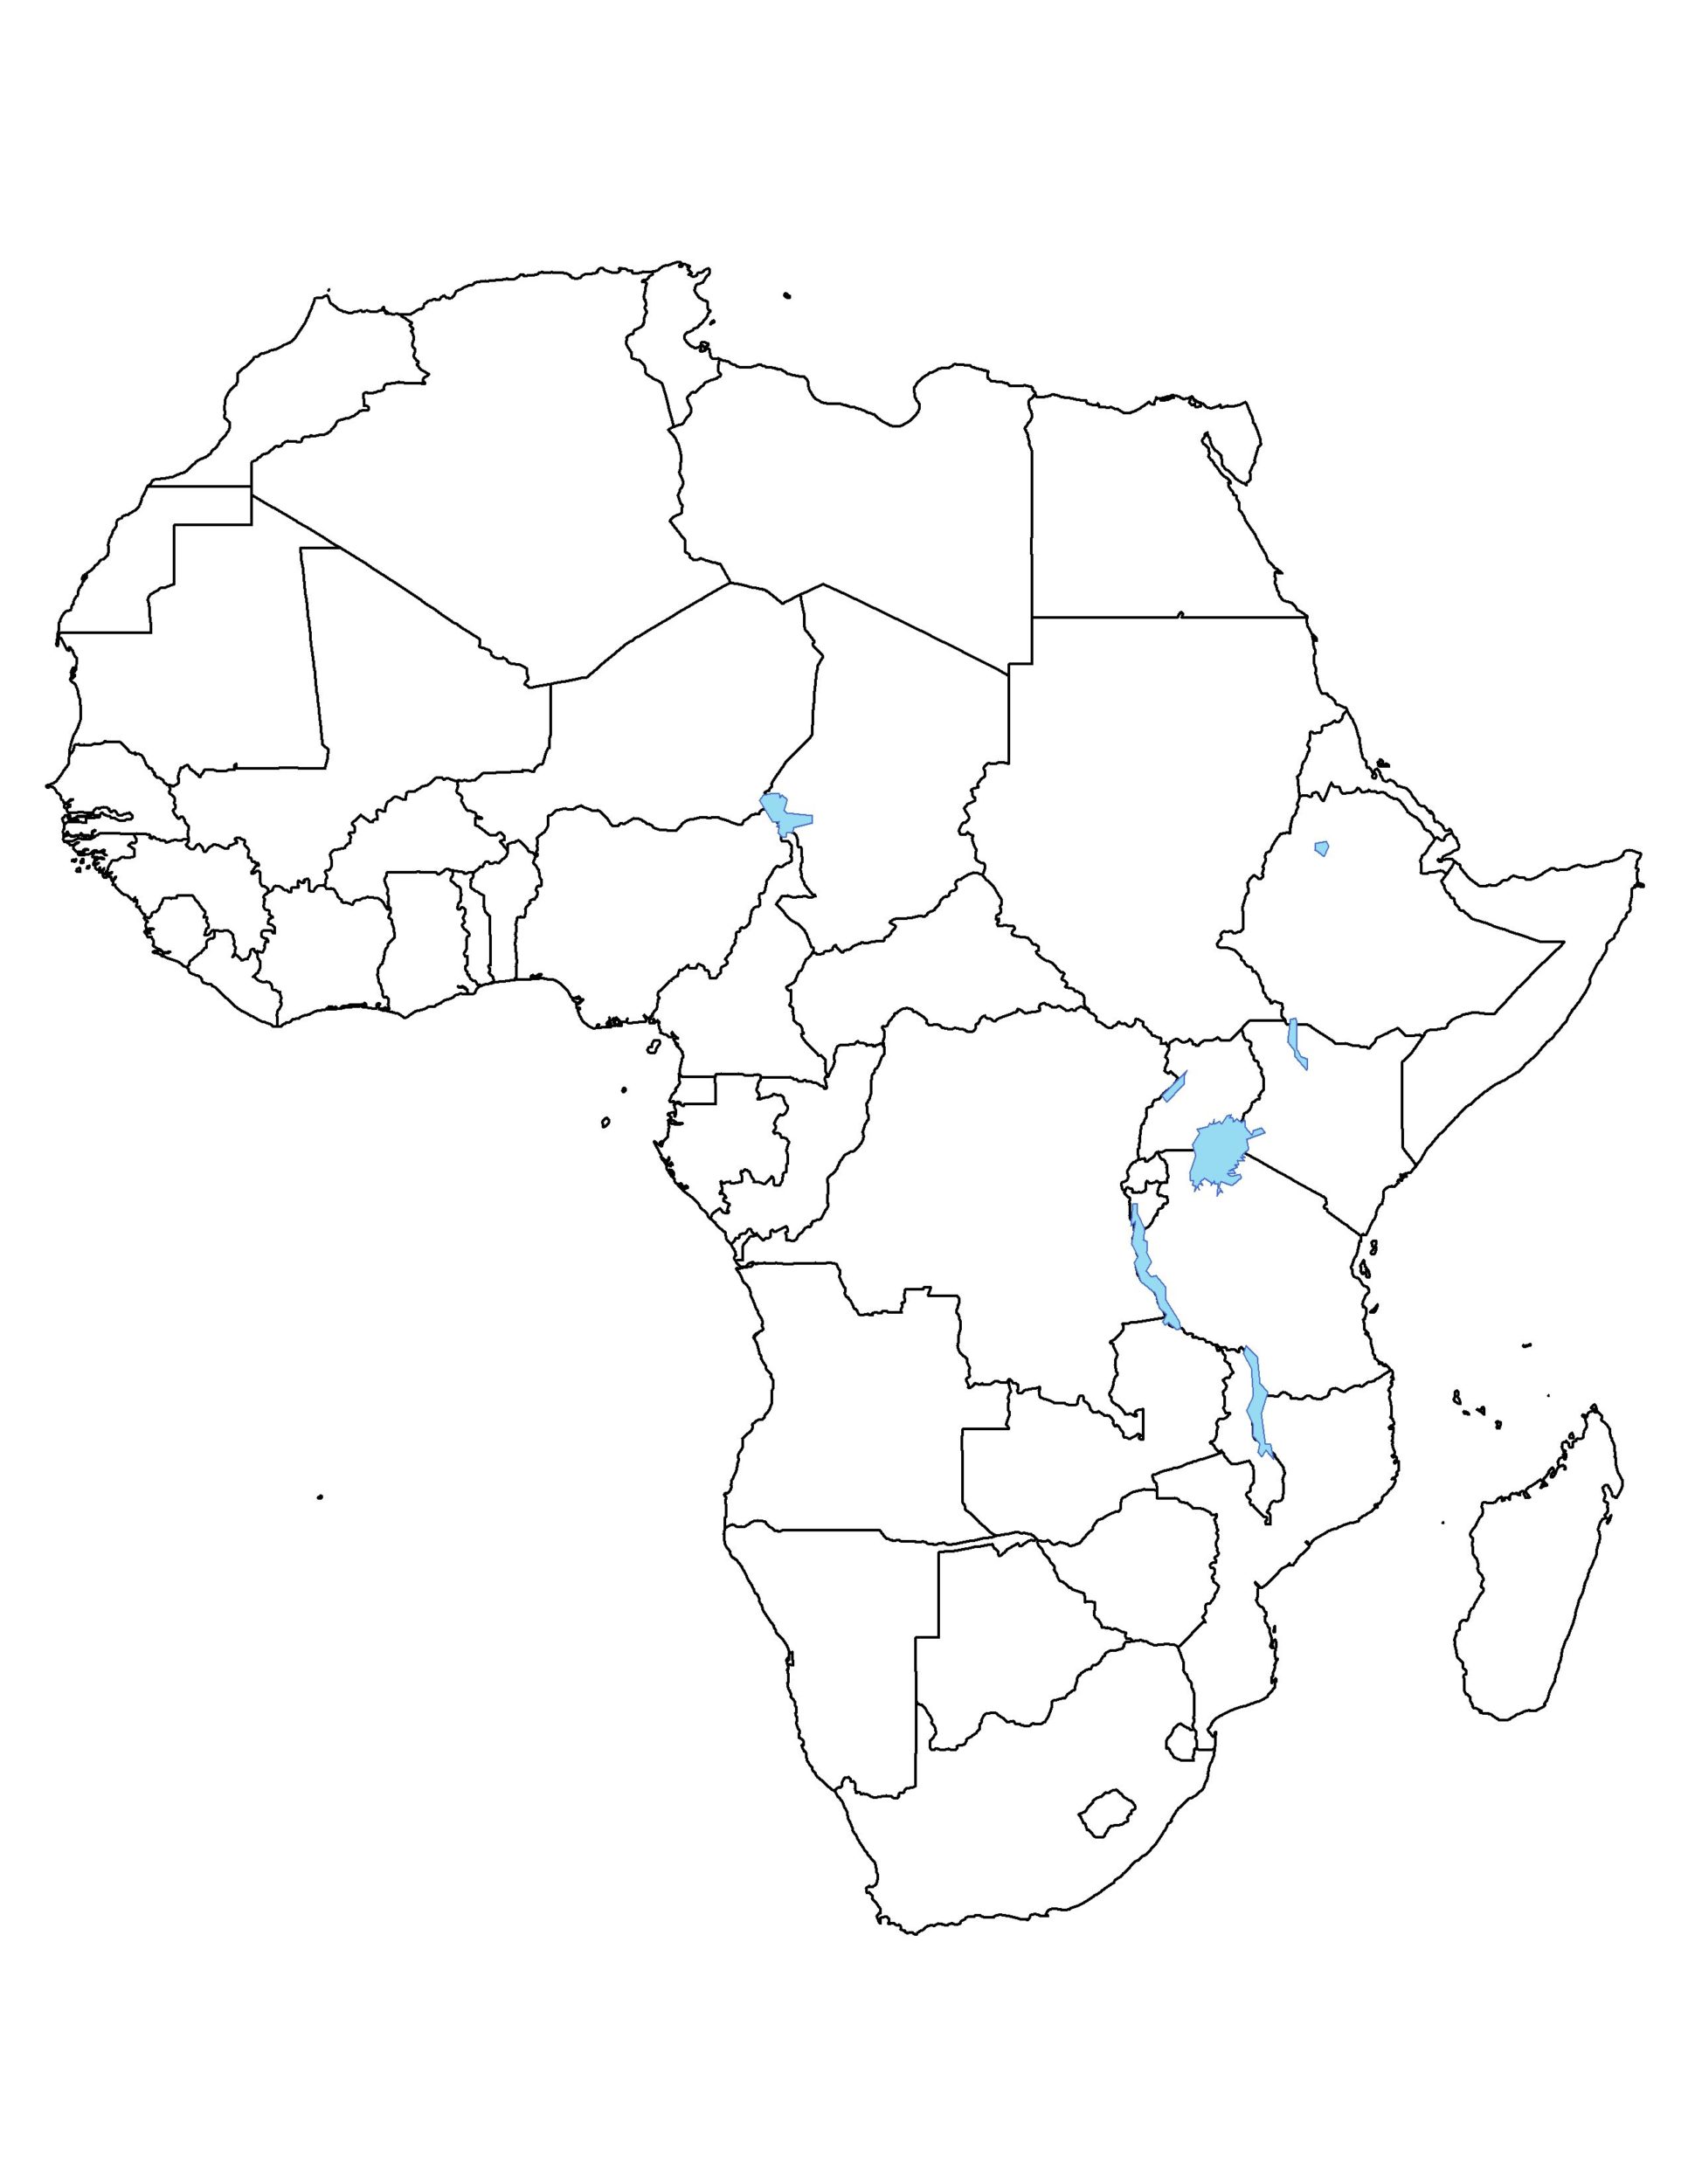 Blank Map of Africa | Large Outline Map of Africa